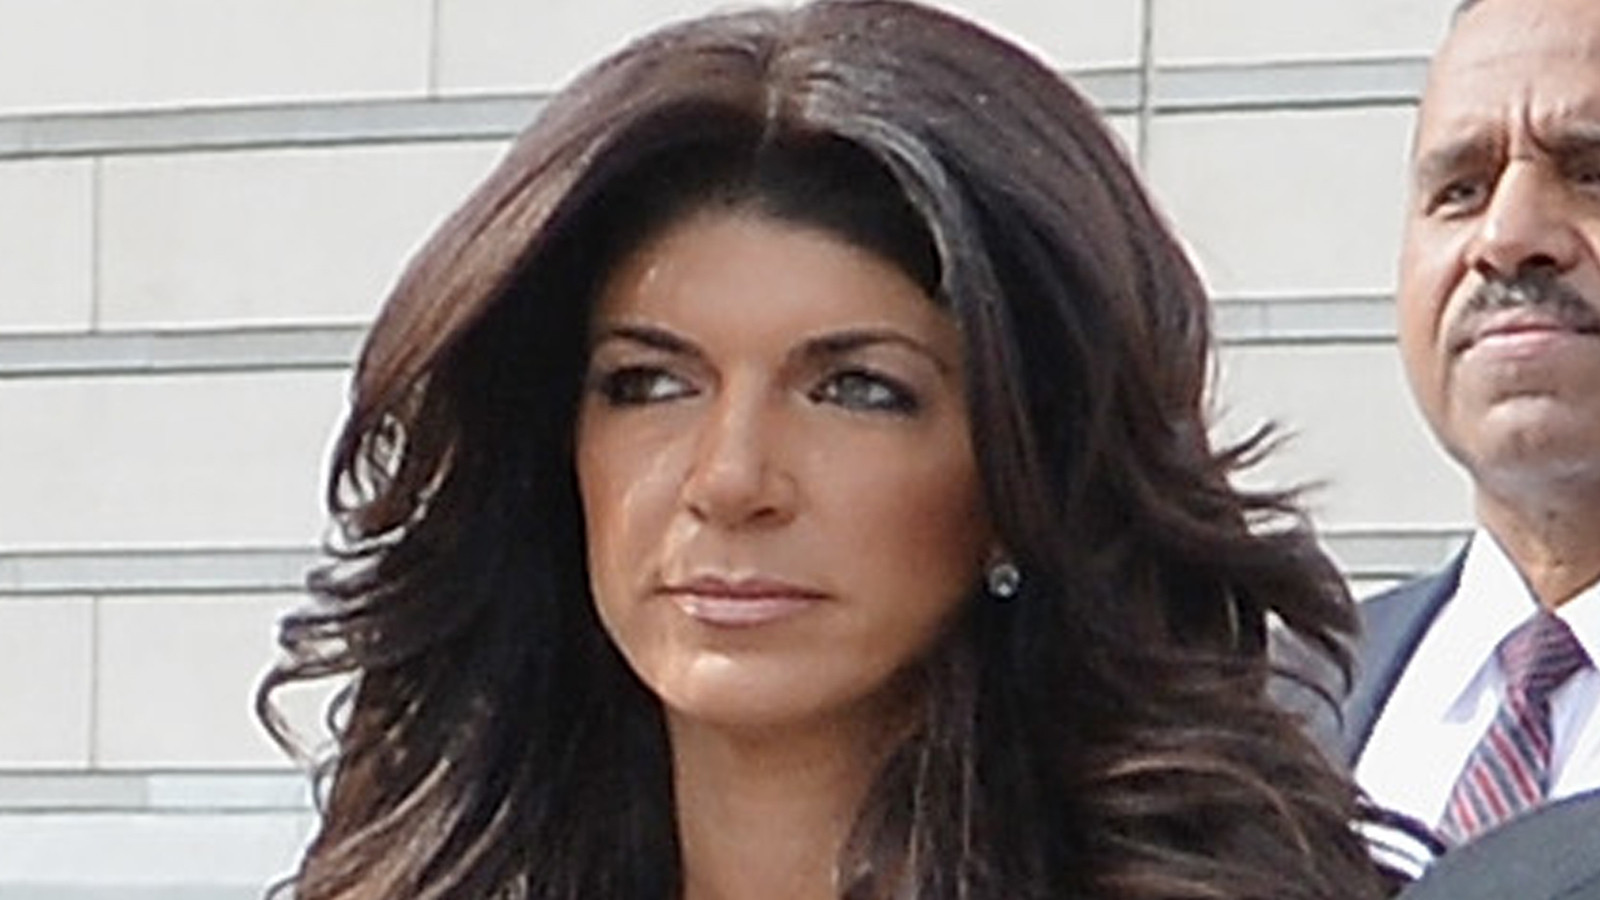 It was reported last week that Teresa Giudice would be serving her 15 month sentence at the Connecticut based prison made famous by the Netflix series ...